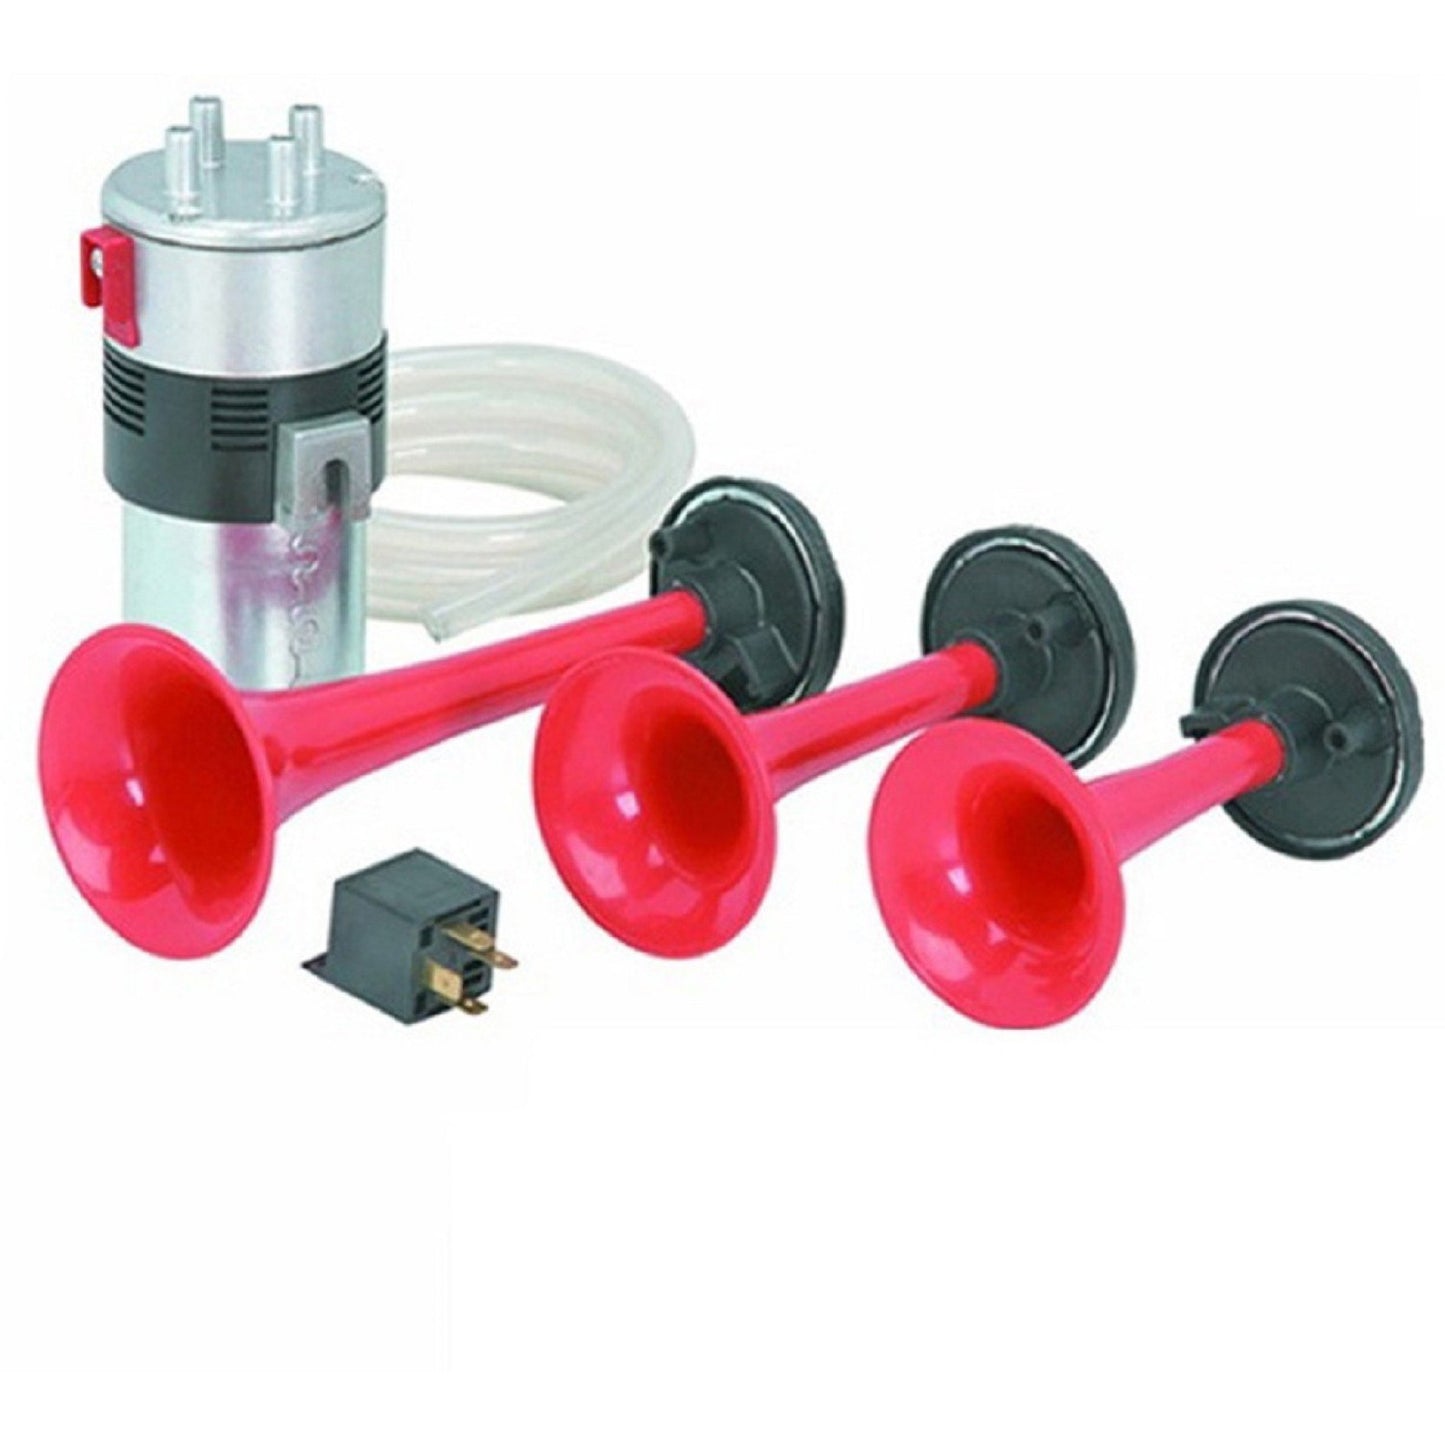 Stebel 3 Pipe Air Horn for Cars, Trucks, Boats, ATVS & Heavy Vehicles